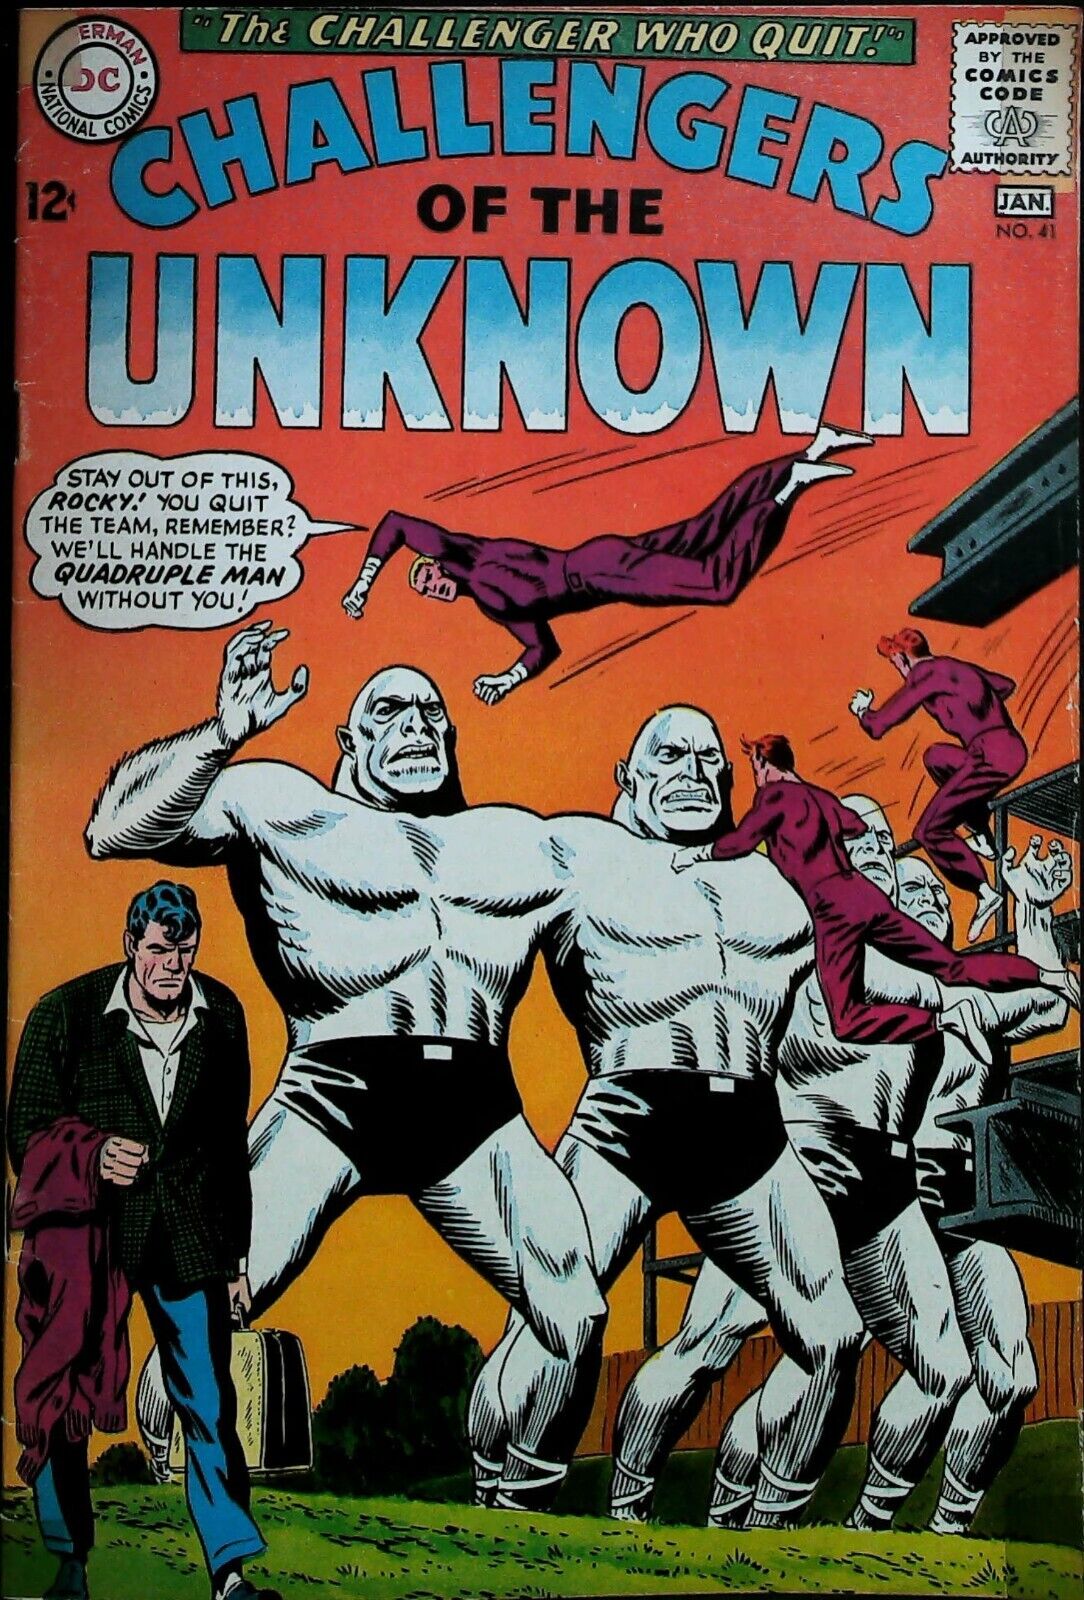 Challengers Of The Unknown #41 Vol 1 (1965) - DC COmics - Very Fine Range